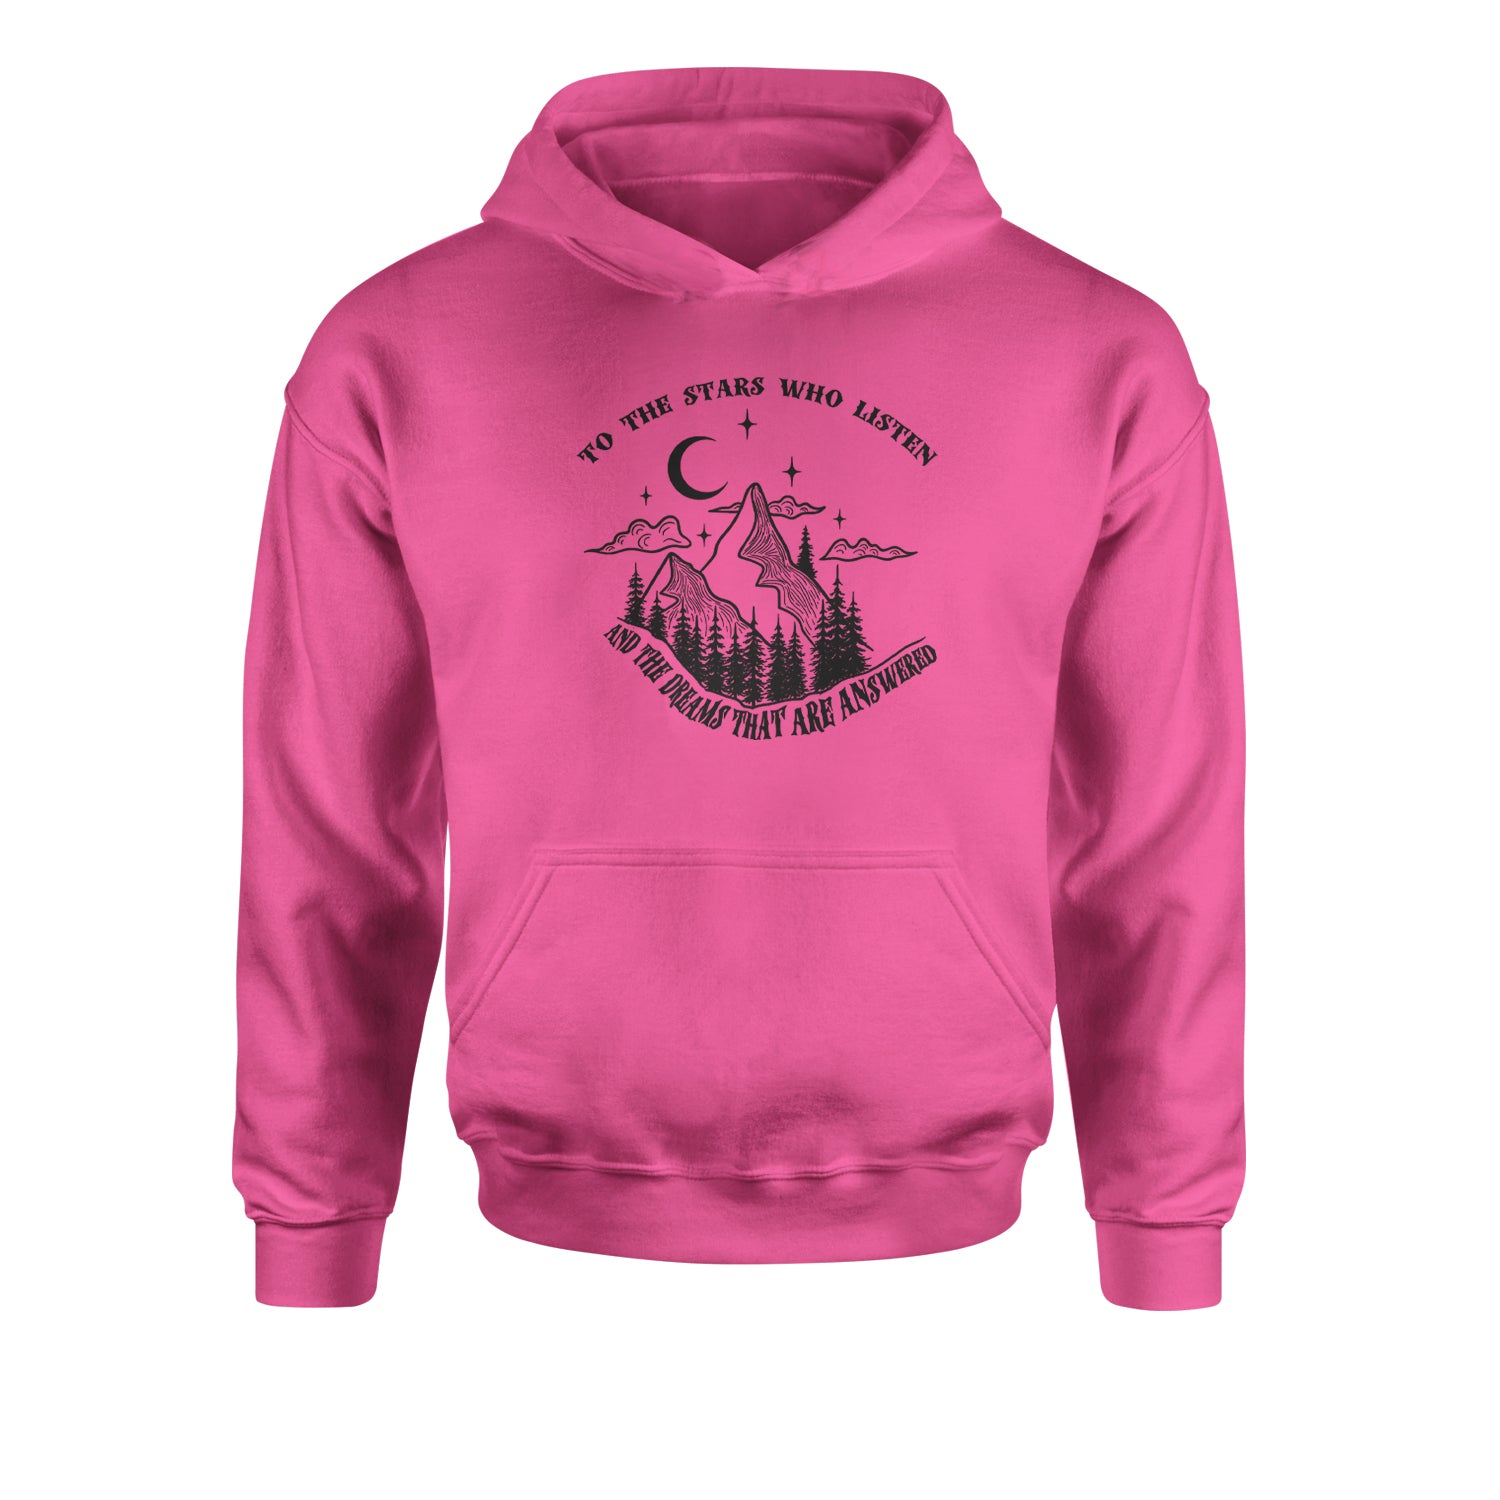 To The Stars Who Listen… ACOTAR Quote Youth-Sized Hoodie acotar, court, tamlin, thorns by Expression Tees